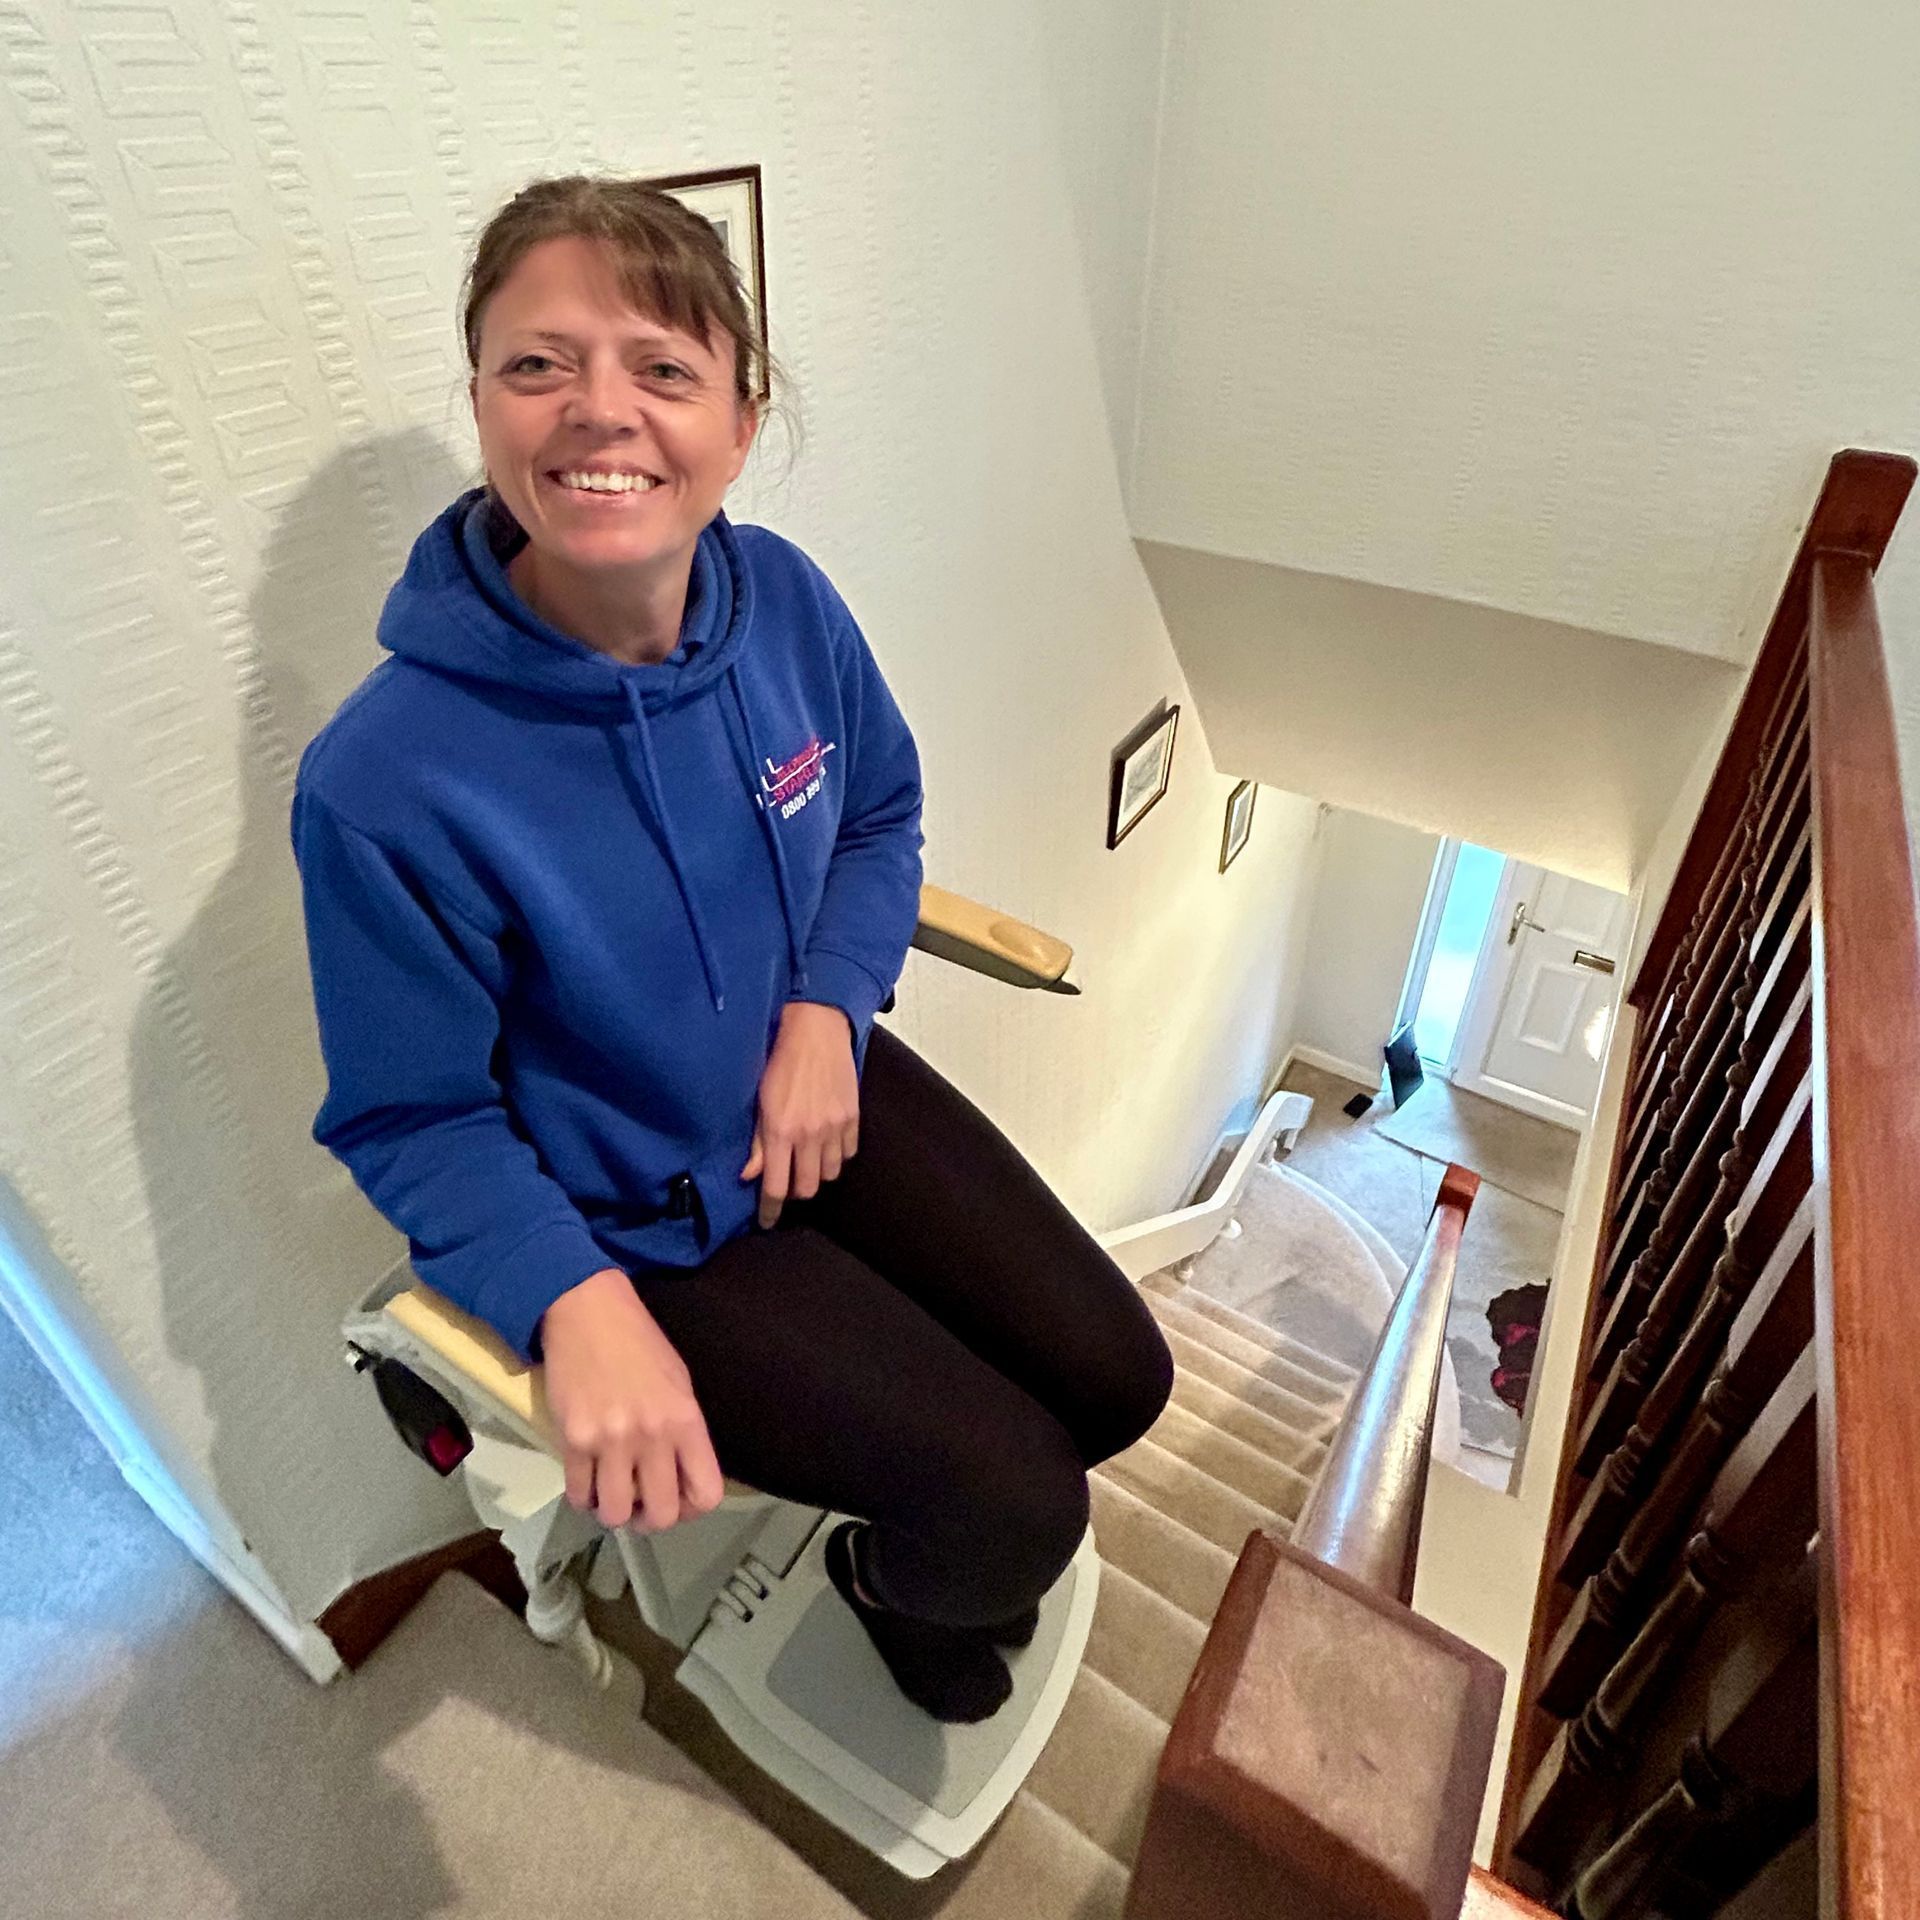 Hi. I'm Kerry. Please get in touch for stairlift advise!